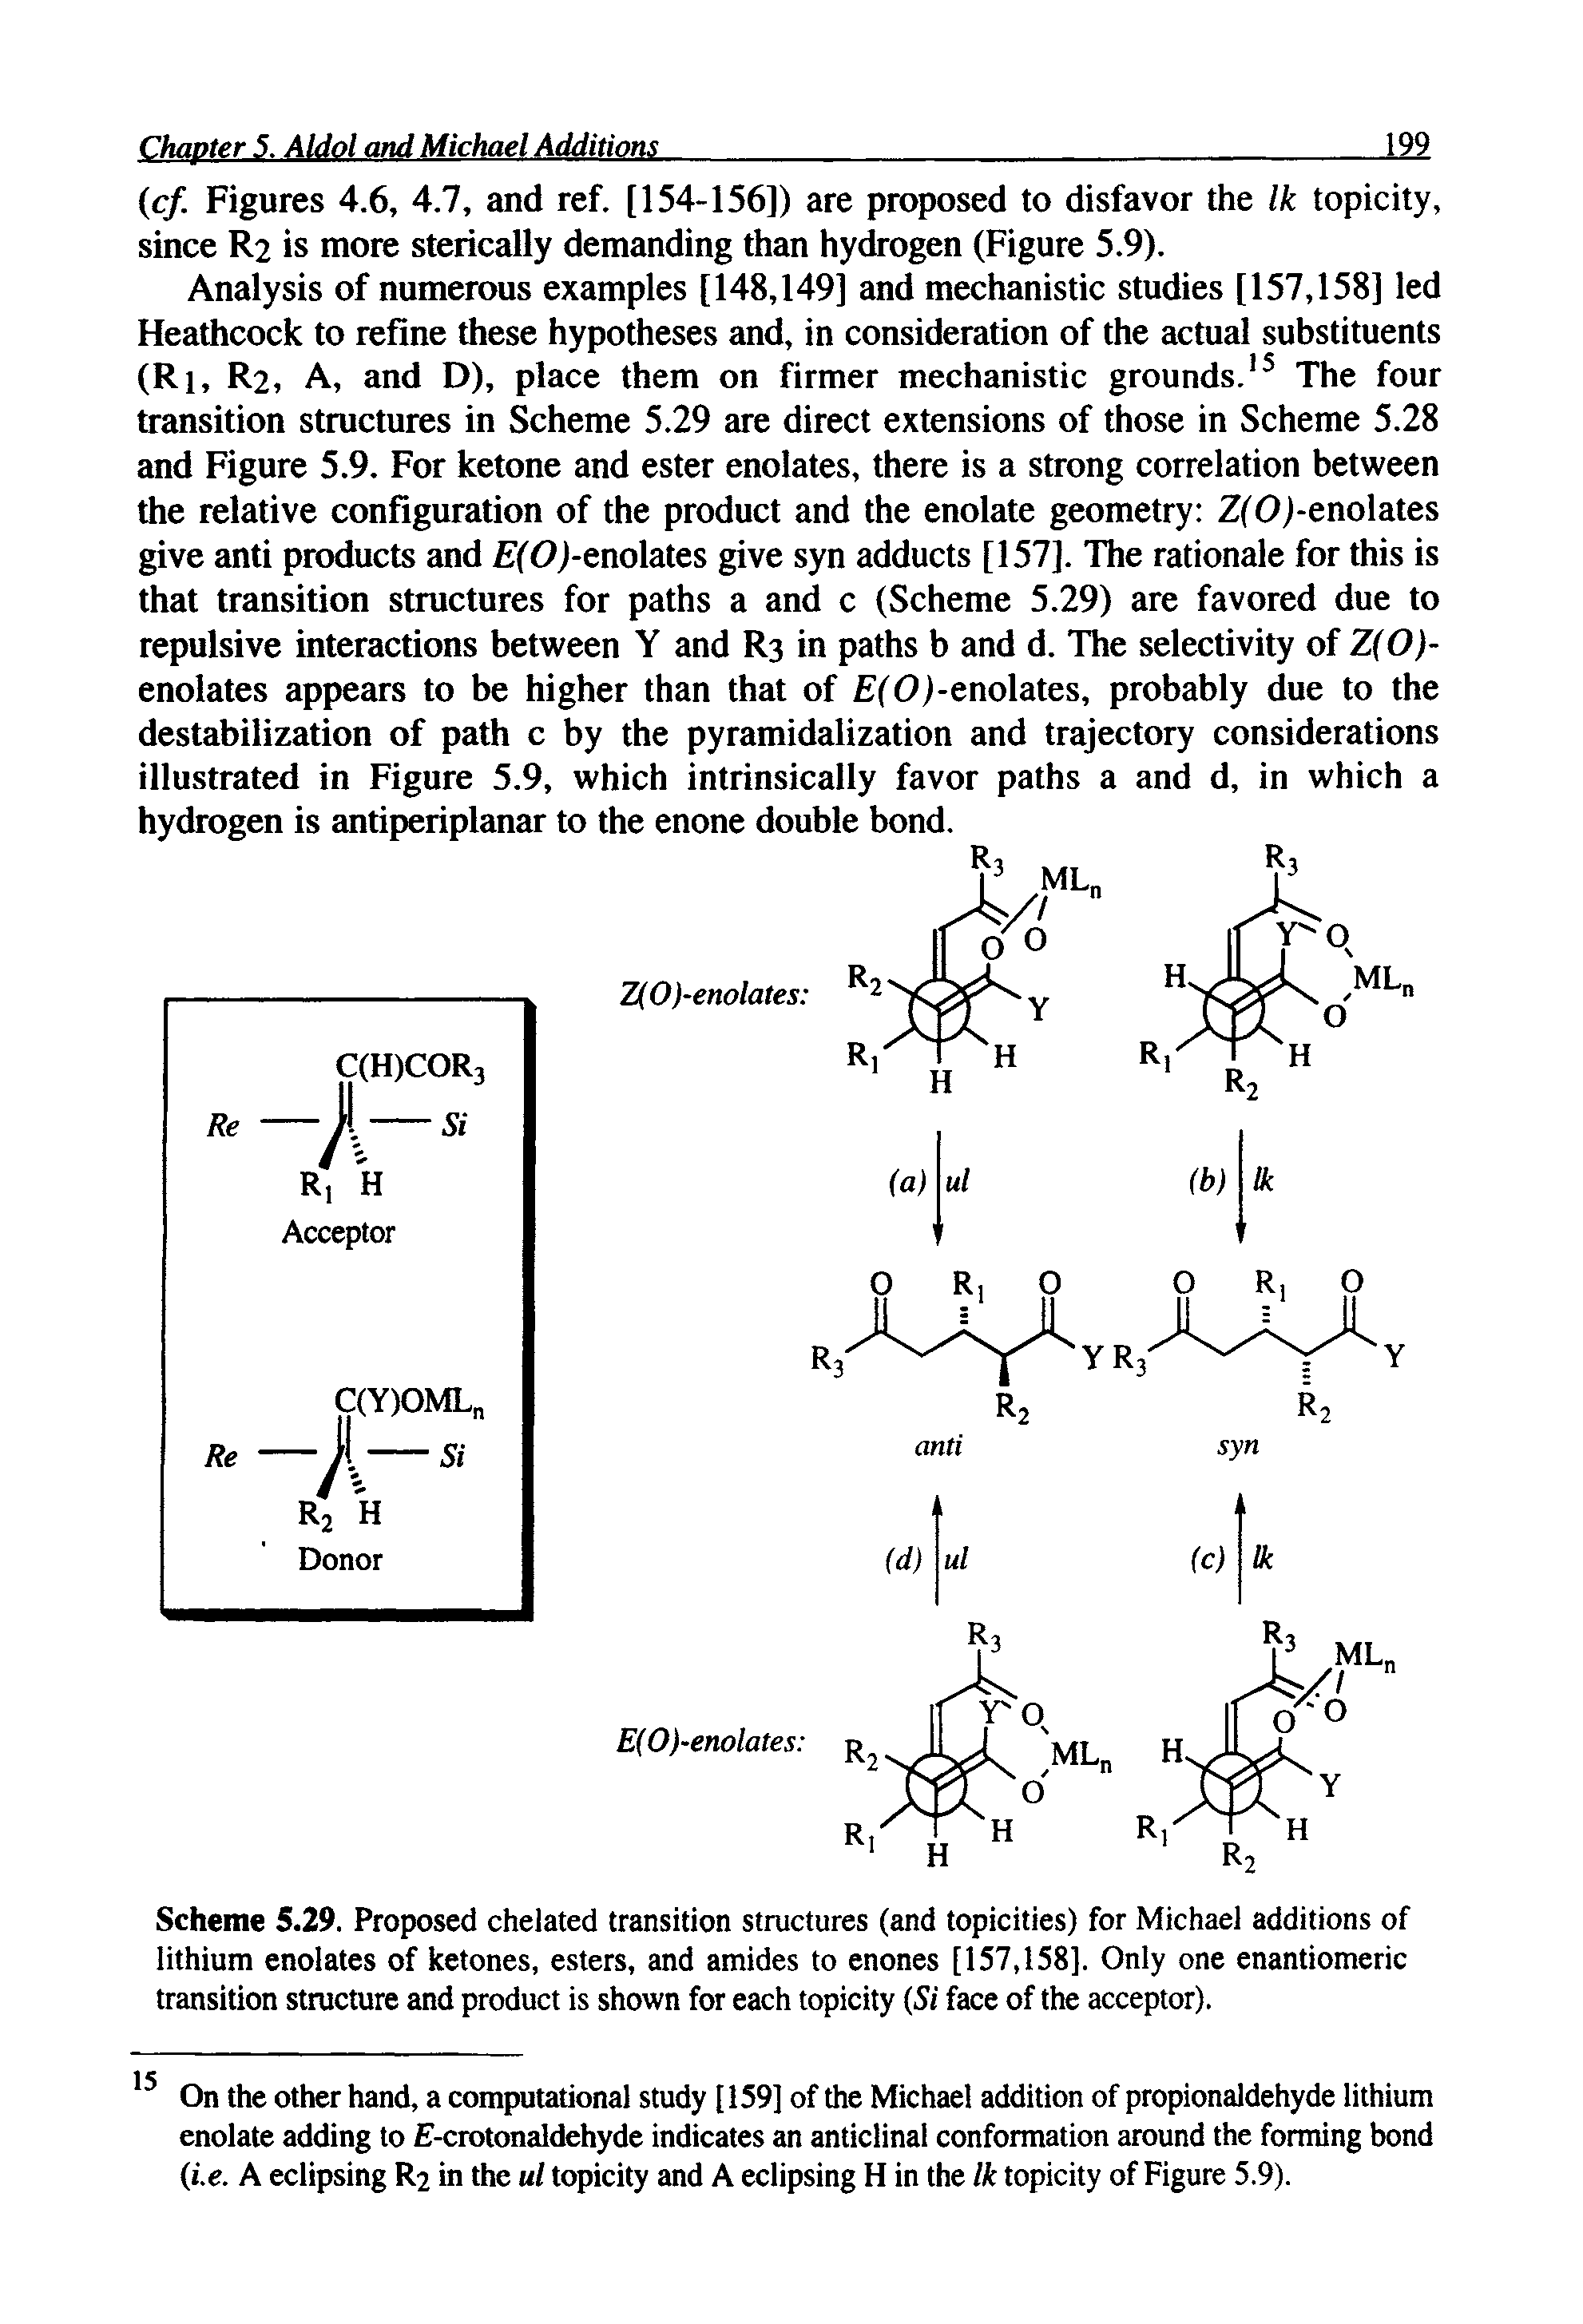 Scheme 5.29. Proposed chelated transition structures (and topicities) for Michael additions of lithium enolates of ketones, esters, and amides to enones [157,158]. Only one enantiomeric transition structure and product is shown for each topicity (Si face of the acceptor).